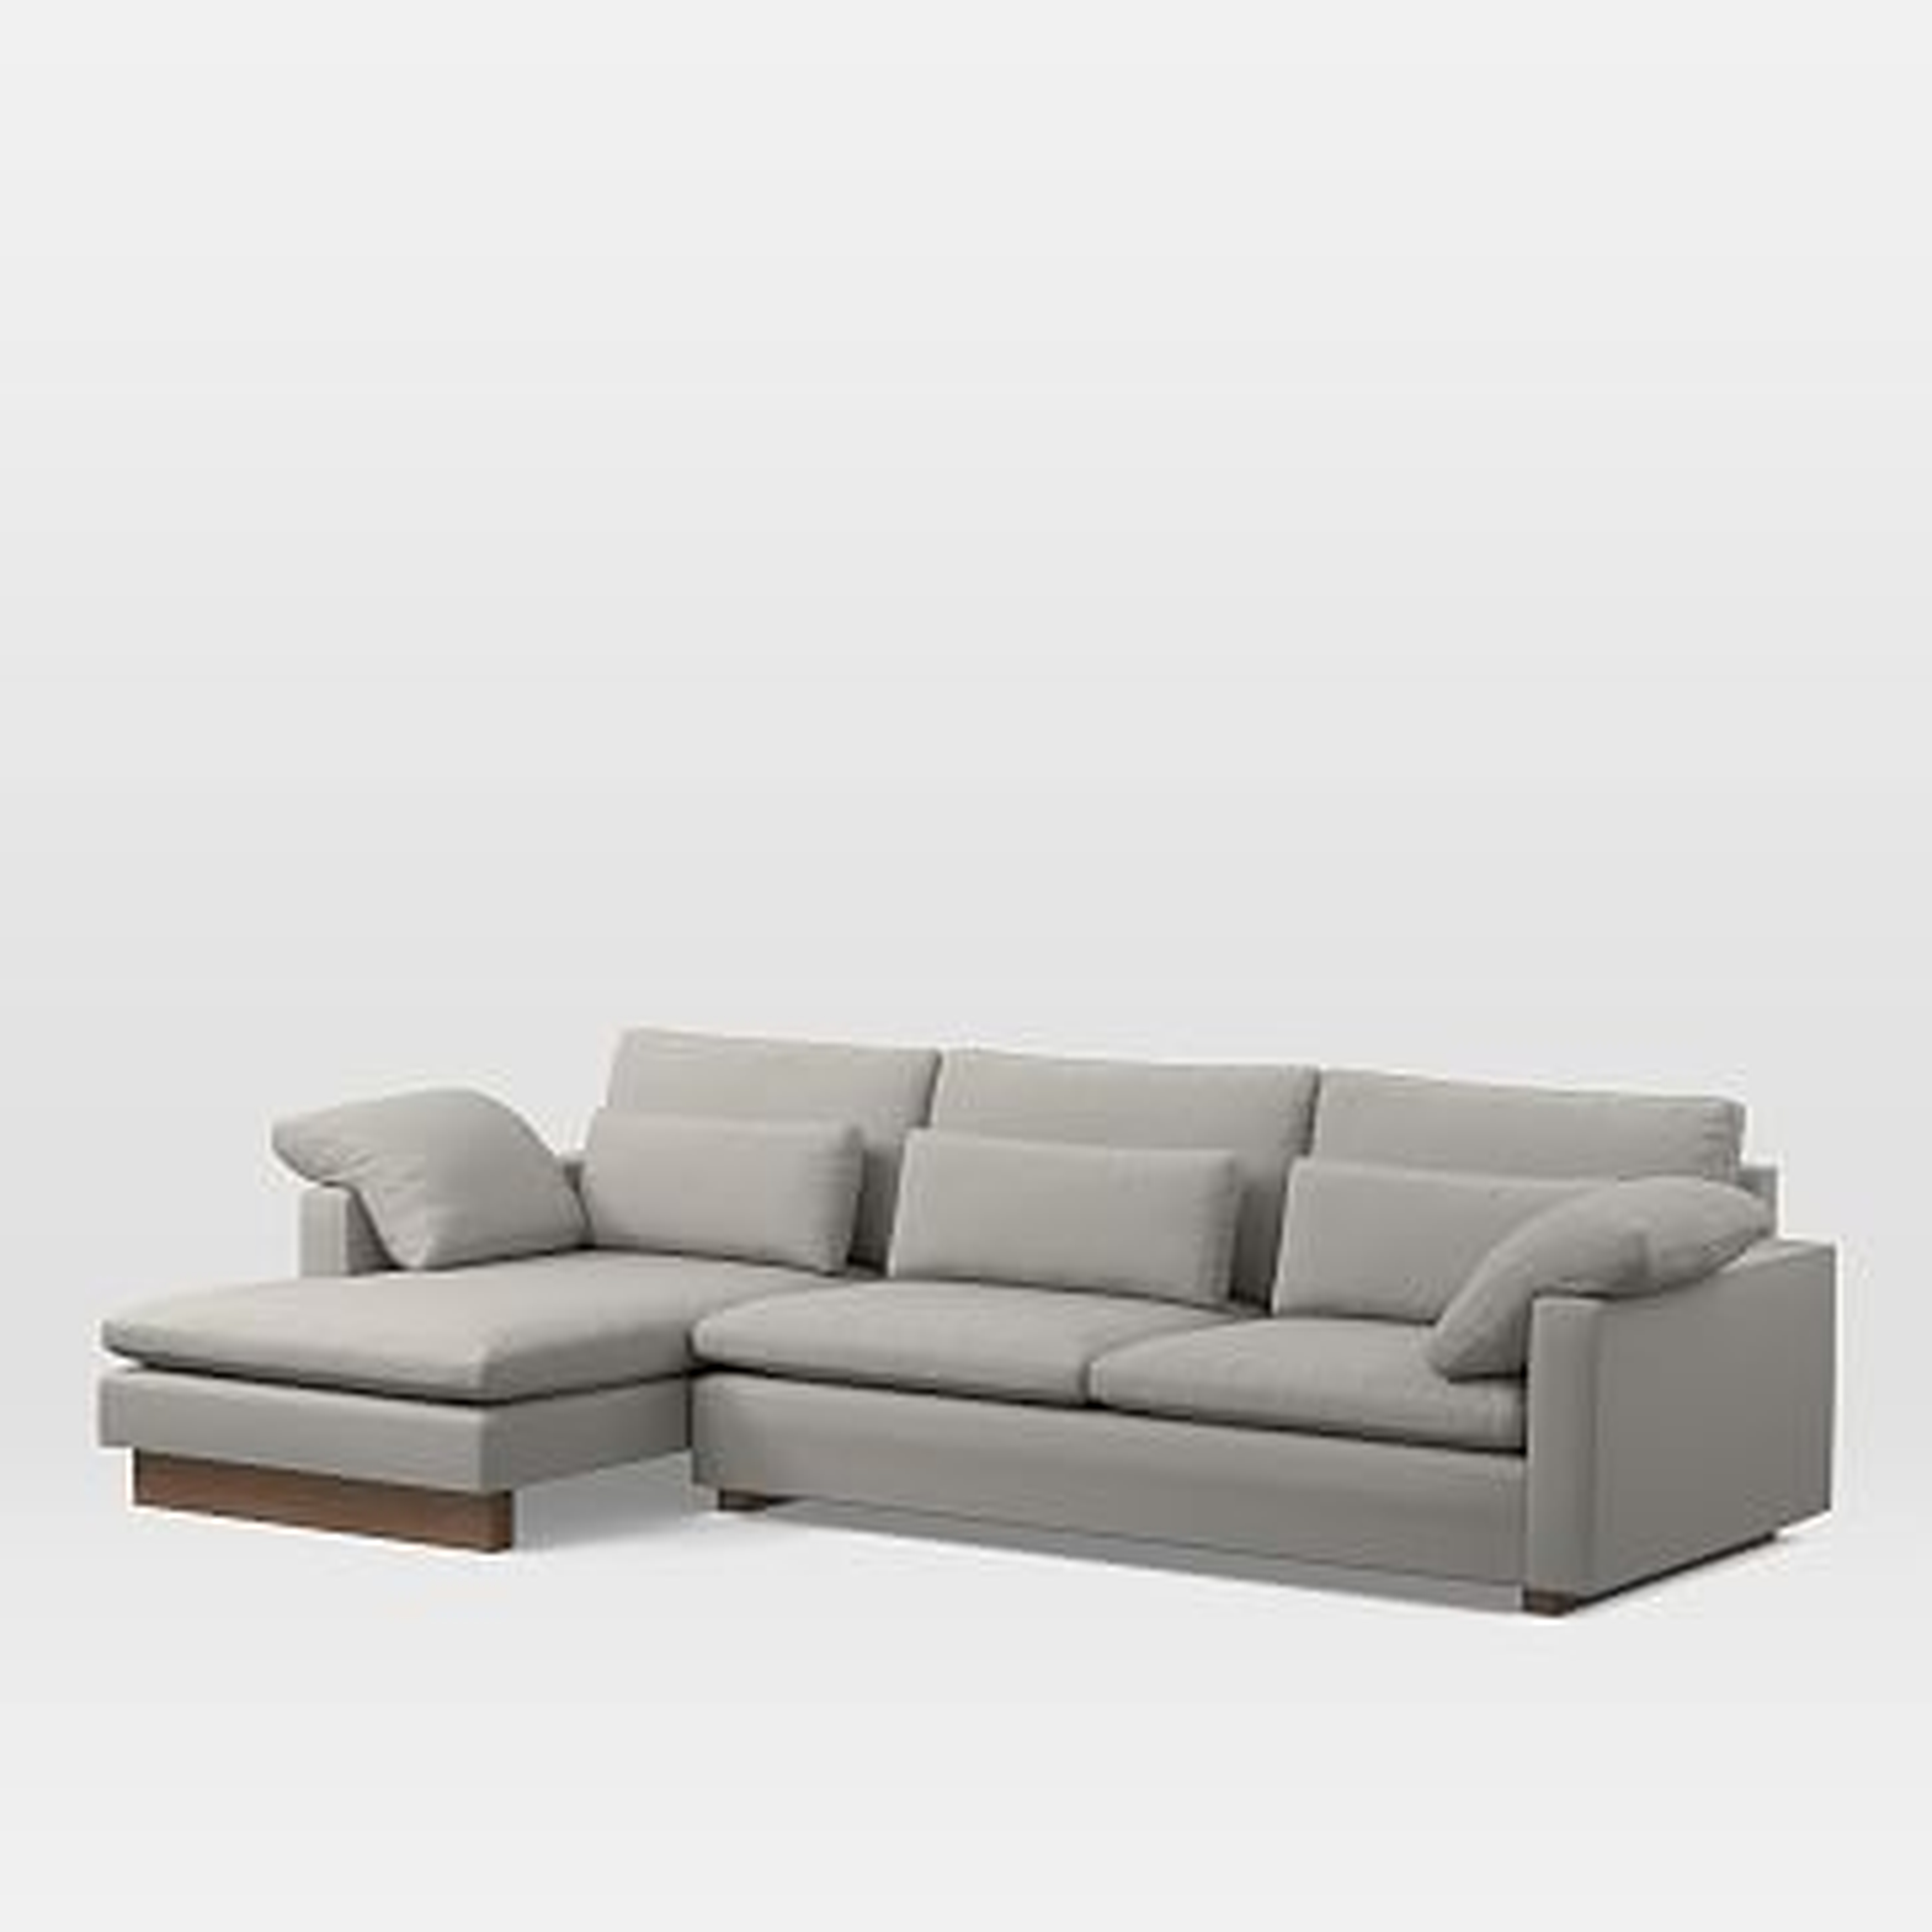 Harmony Sectional Set 10: Right Arm 2 Seater Sofa, Left Arm Chaise, Down Blend, Yarn Dyed Linen Weave, Frost Gray, Walnut - West Elm